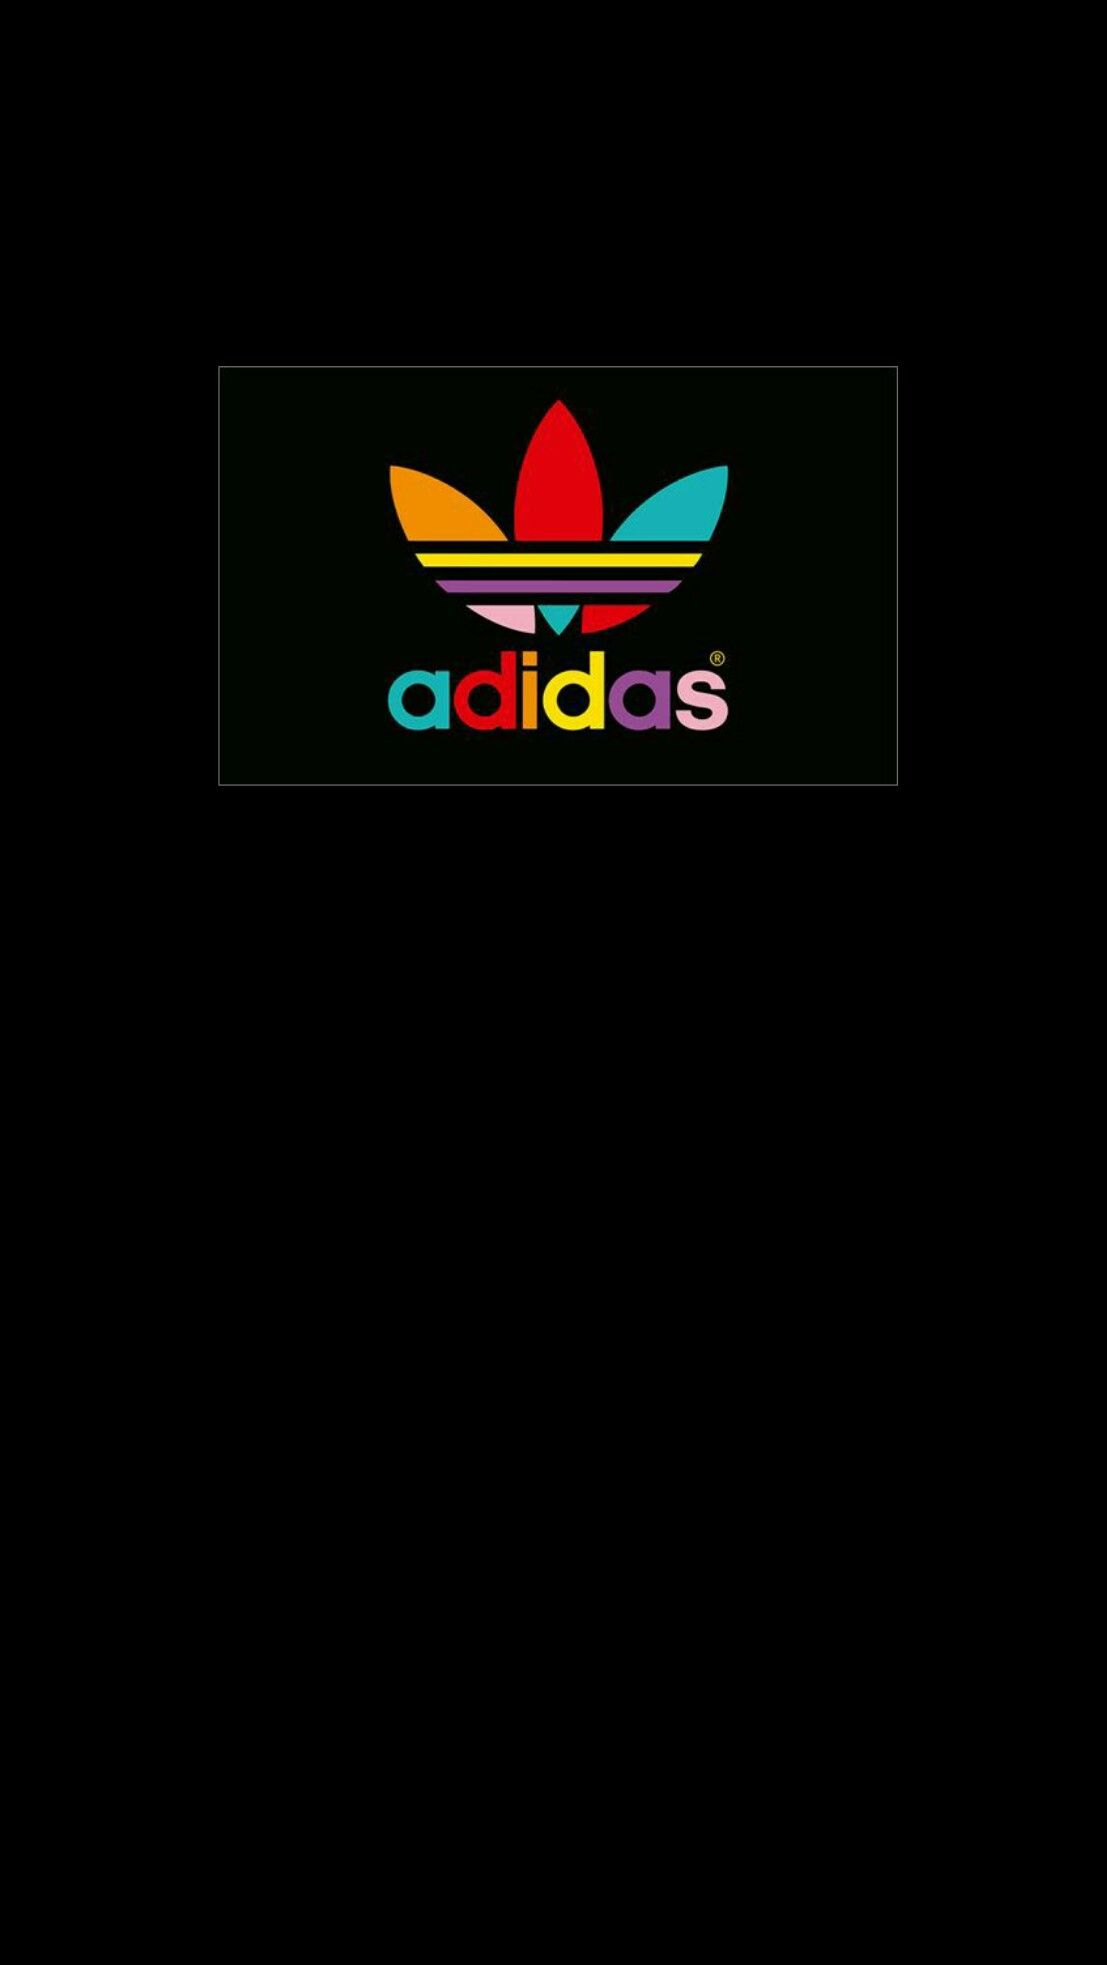 Red And Black Adidas Wallpapers Images Is Cool Wallpapers - Adidas Originals - HD Wallpaper 